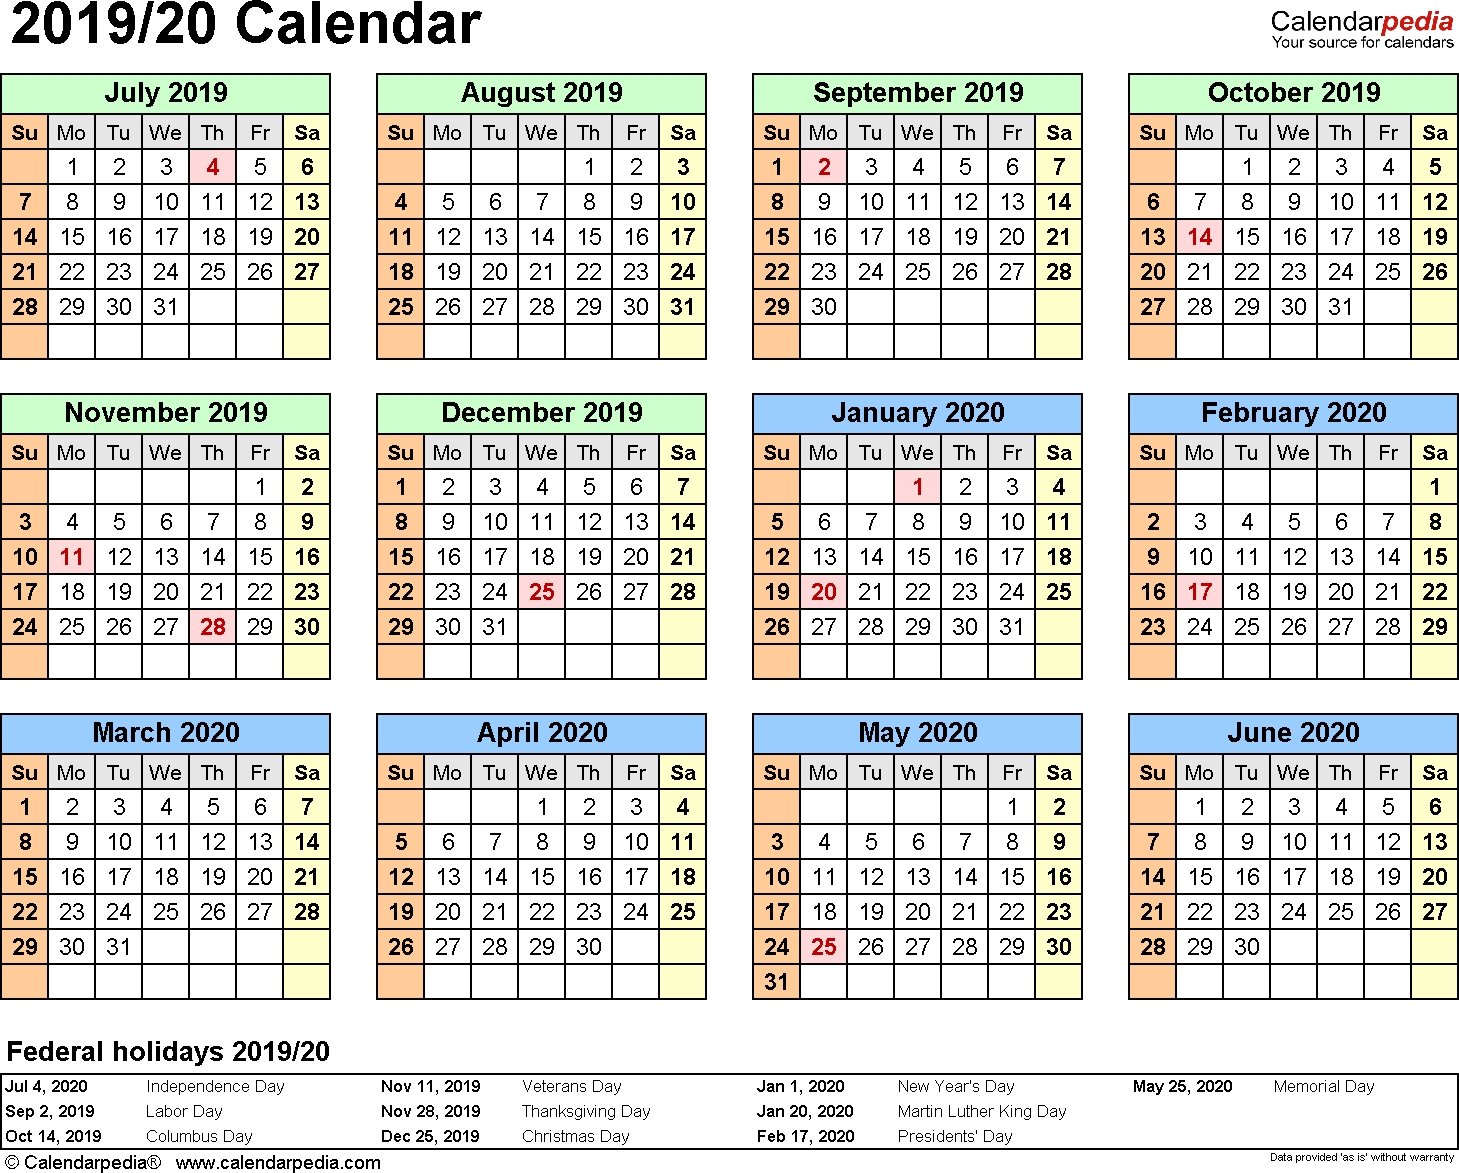 Split Year Calendar 2019/20 (July To June) - Pdf Templates for Free Printed Calendars From June 2019 To June 2020